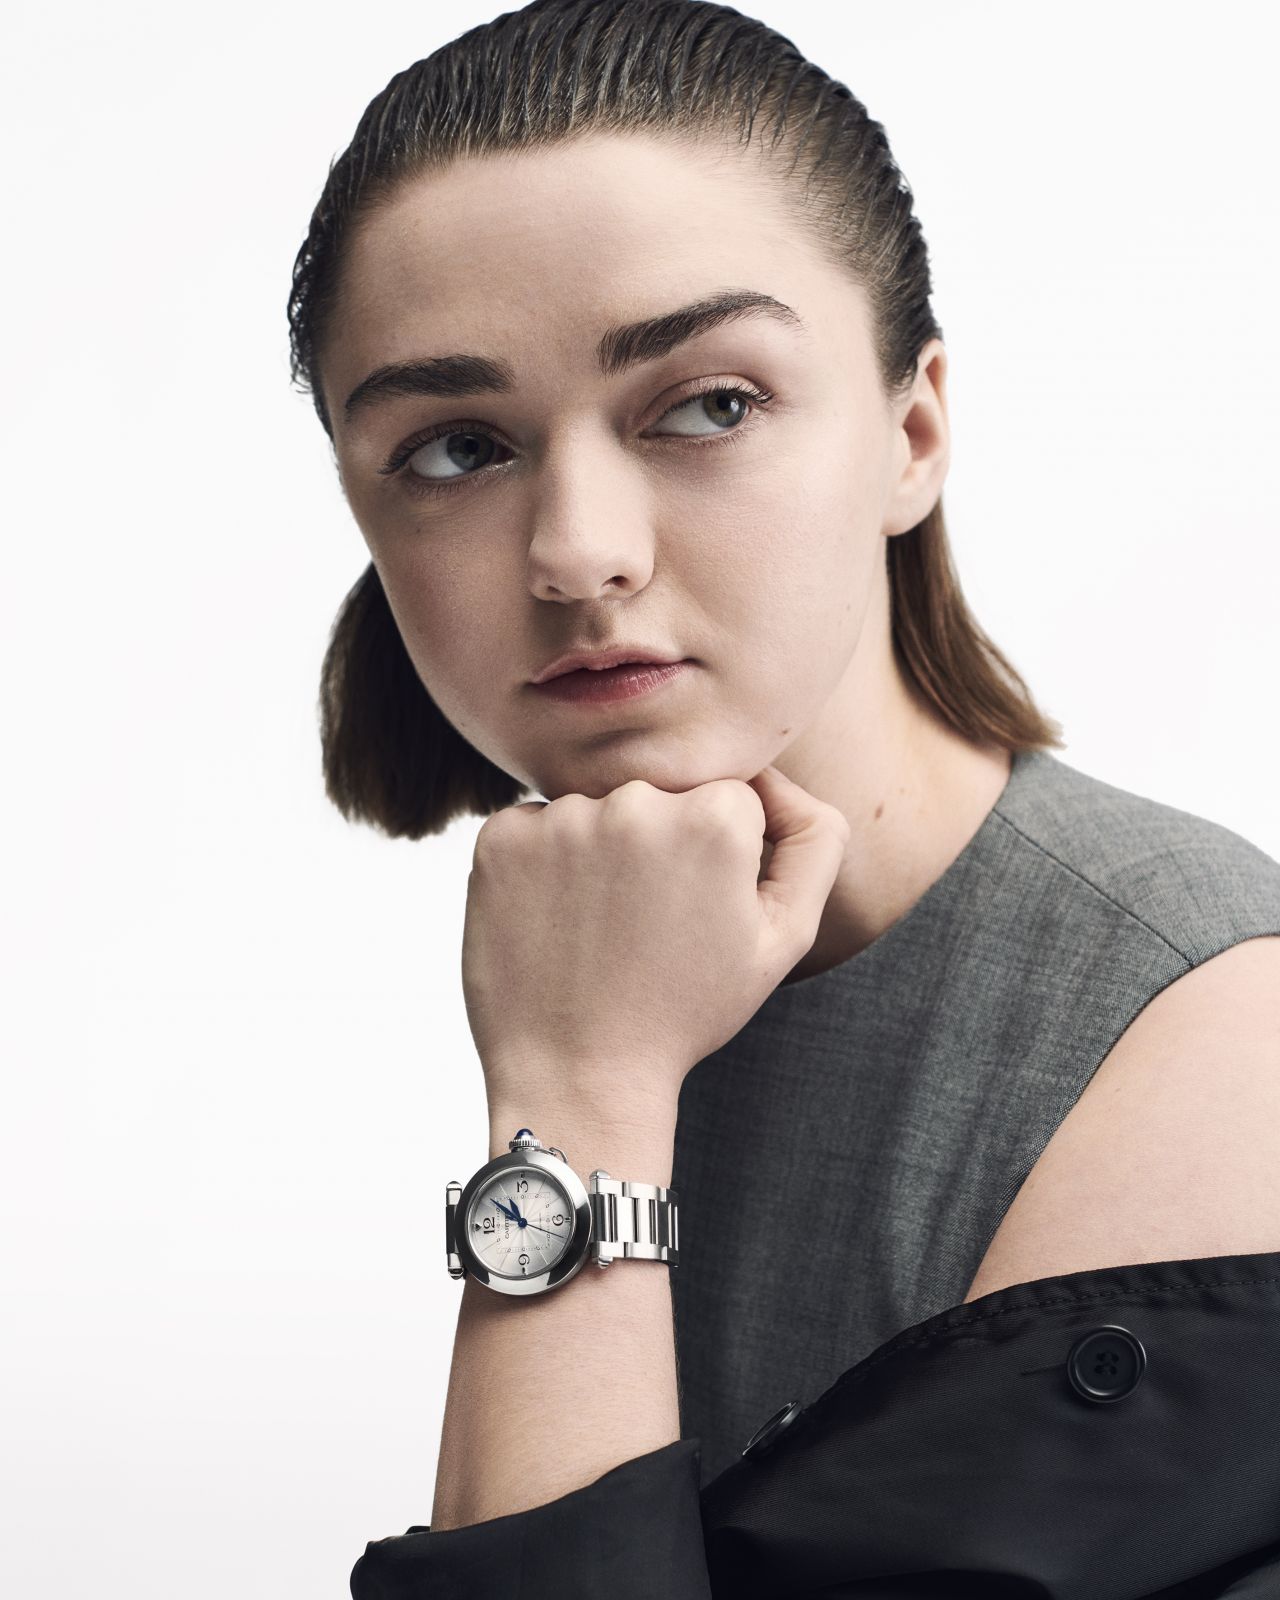 maisie-williams-cartier-promoting-pasha-watch-campaign-2020-9-8.jpg